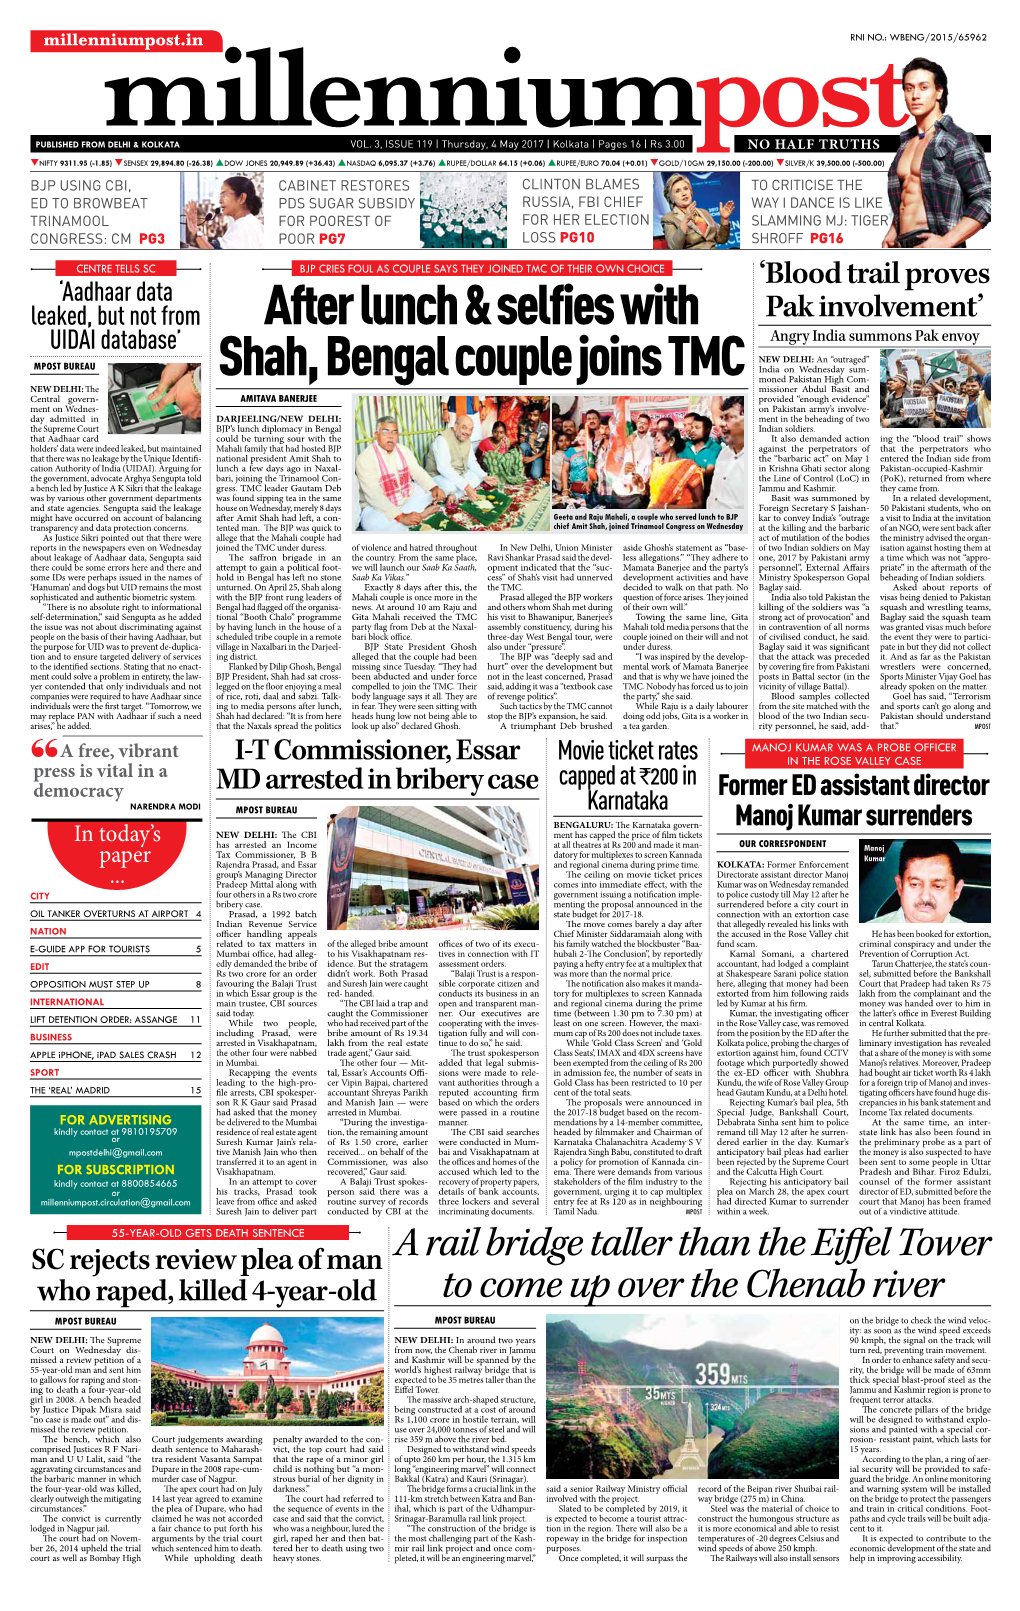 After Lunch & Selfies with Shah, Bengal Couple Joins